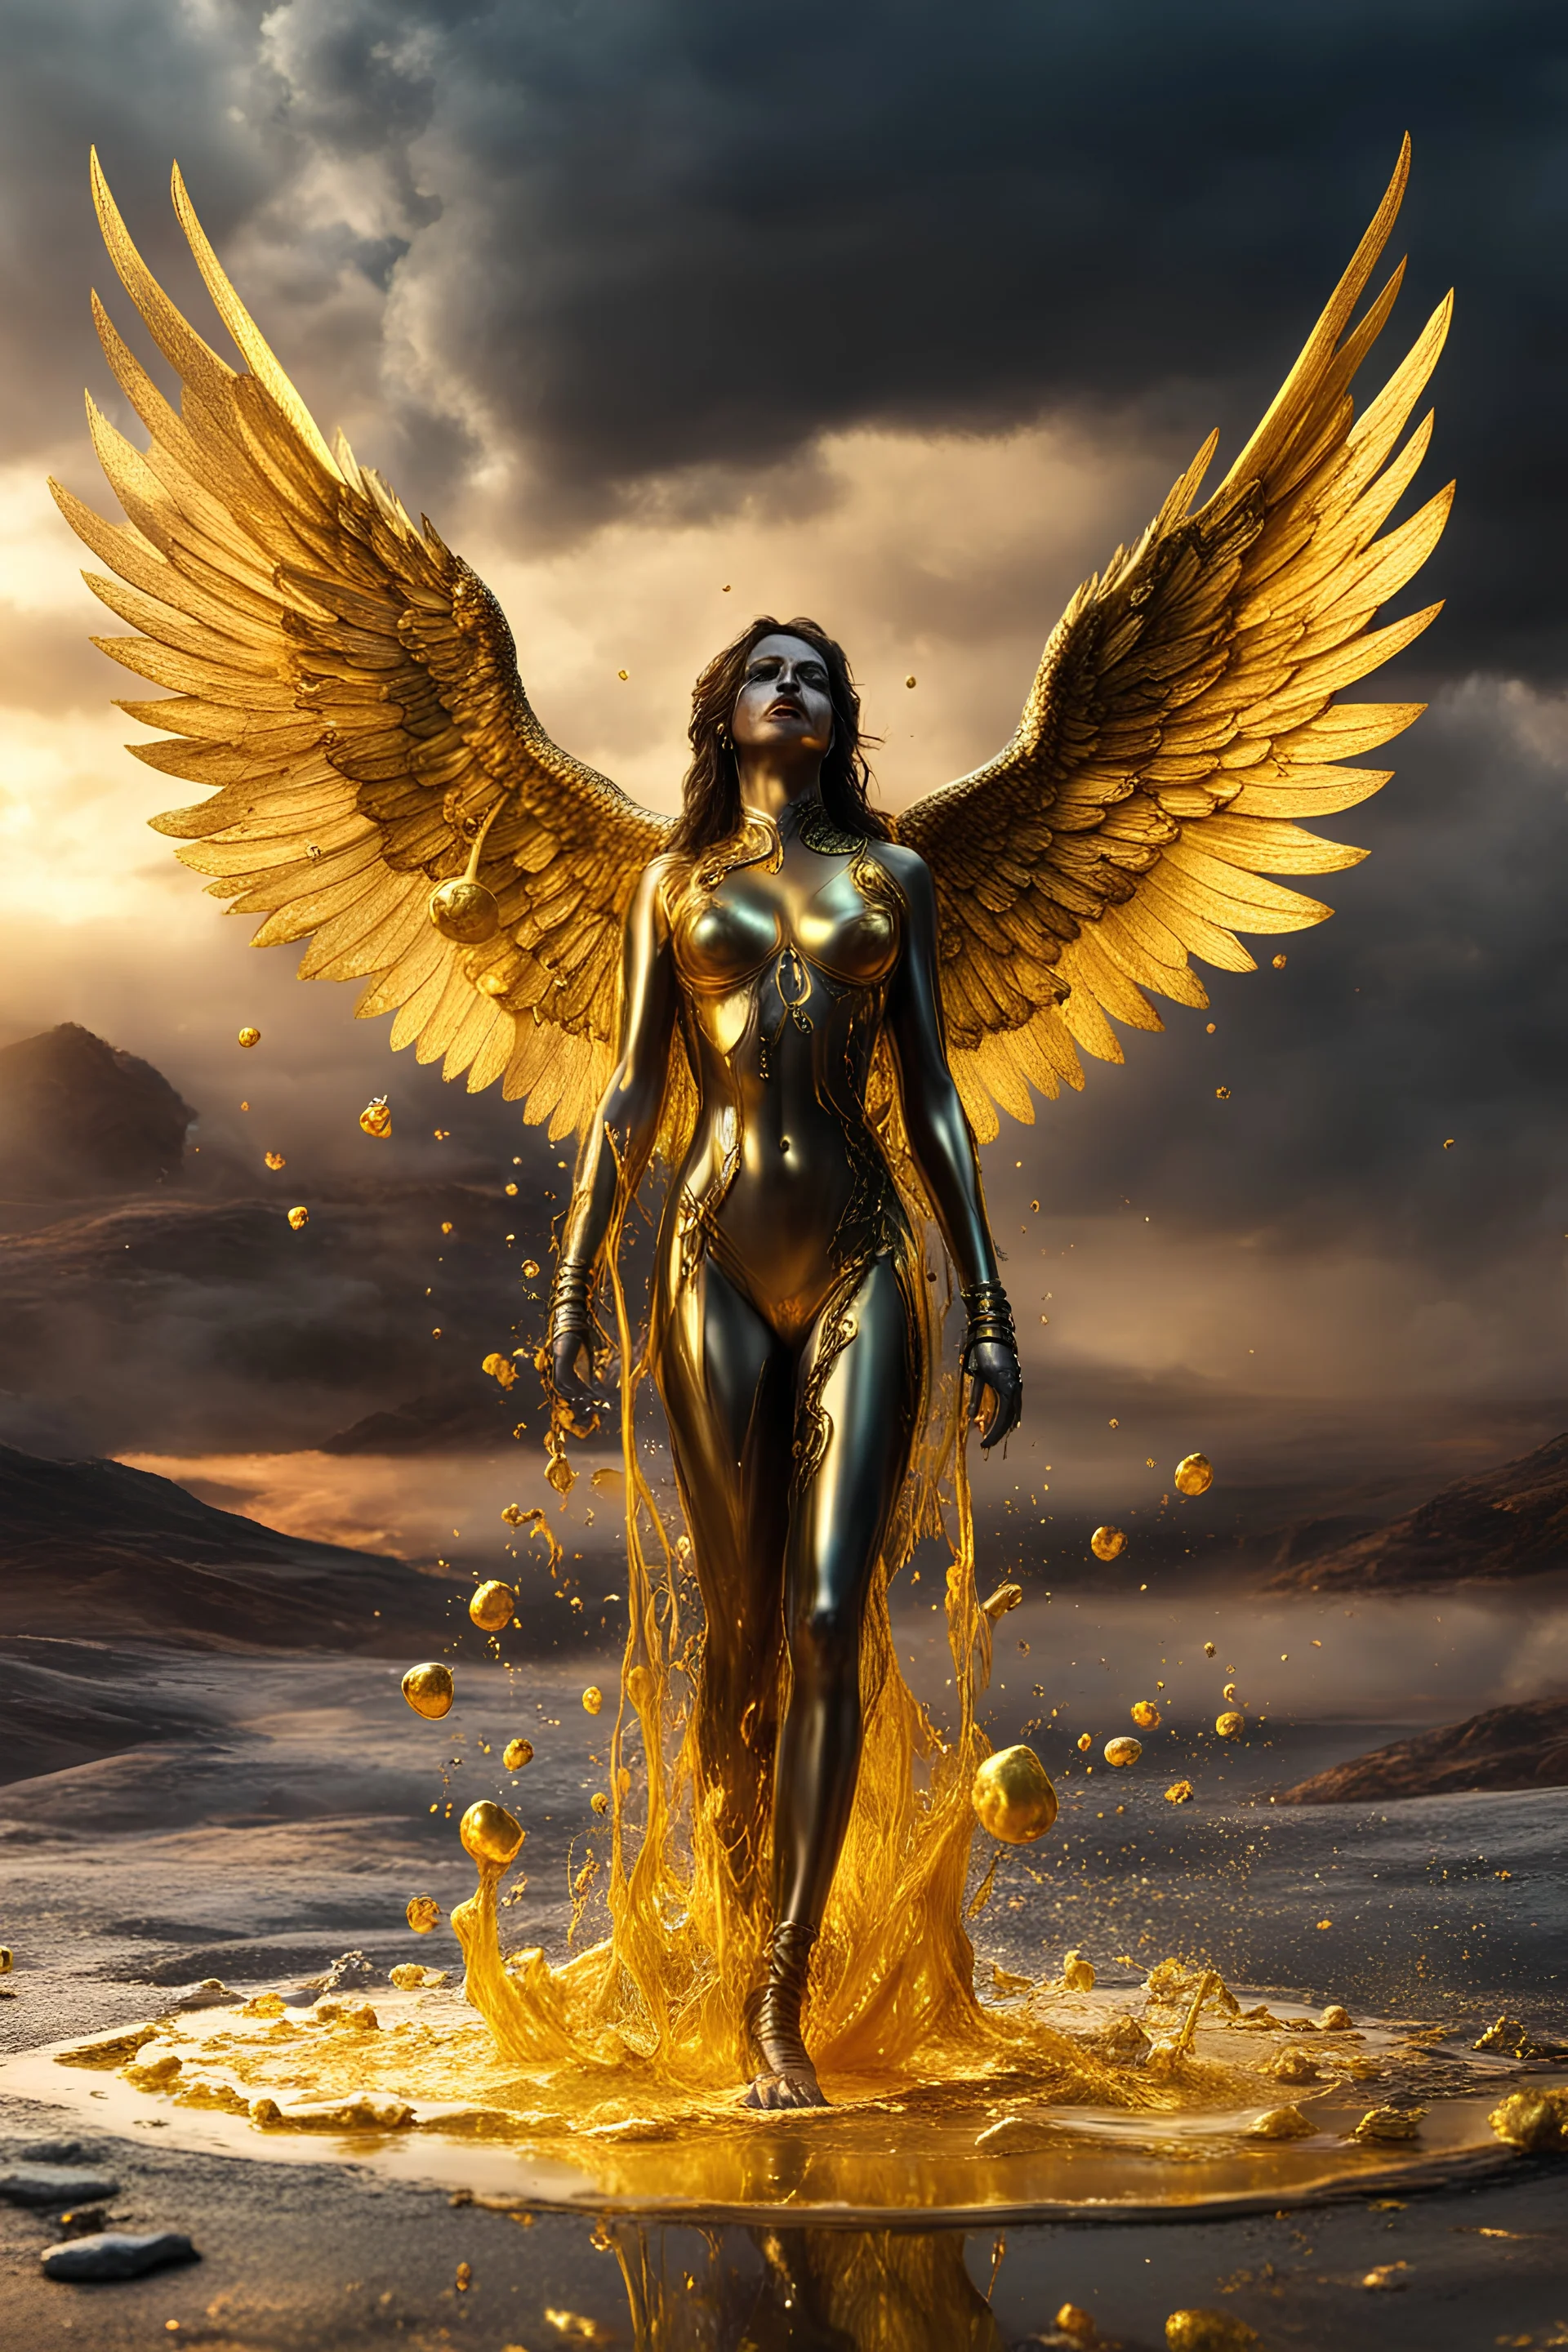 A hyper-realistic photo, beautiful fallen angel disintegrating into gold dripping ink and slime::1 ink dropping in water, molten lava, mask face , 4 hyperrealism, intricate and ultra-realistic details, cinematic dramatic light, cinematic film,Otherworldly dramatic stormy sky and empty desert in the background 64K, hyperrealistic, vivid colors, , 4K ultra detail, , real photo, Realistic Elements, Captured In Infinite Ultra-High-Definition Image Quality And Rendering, Hyperrealism,